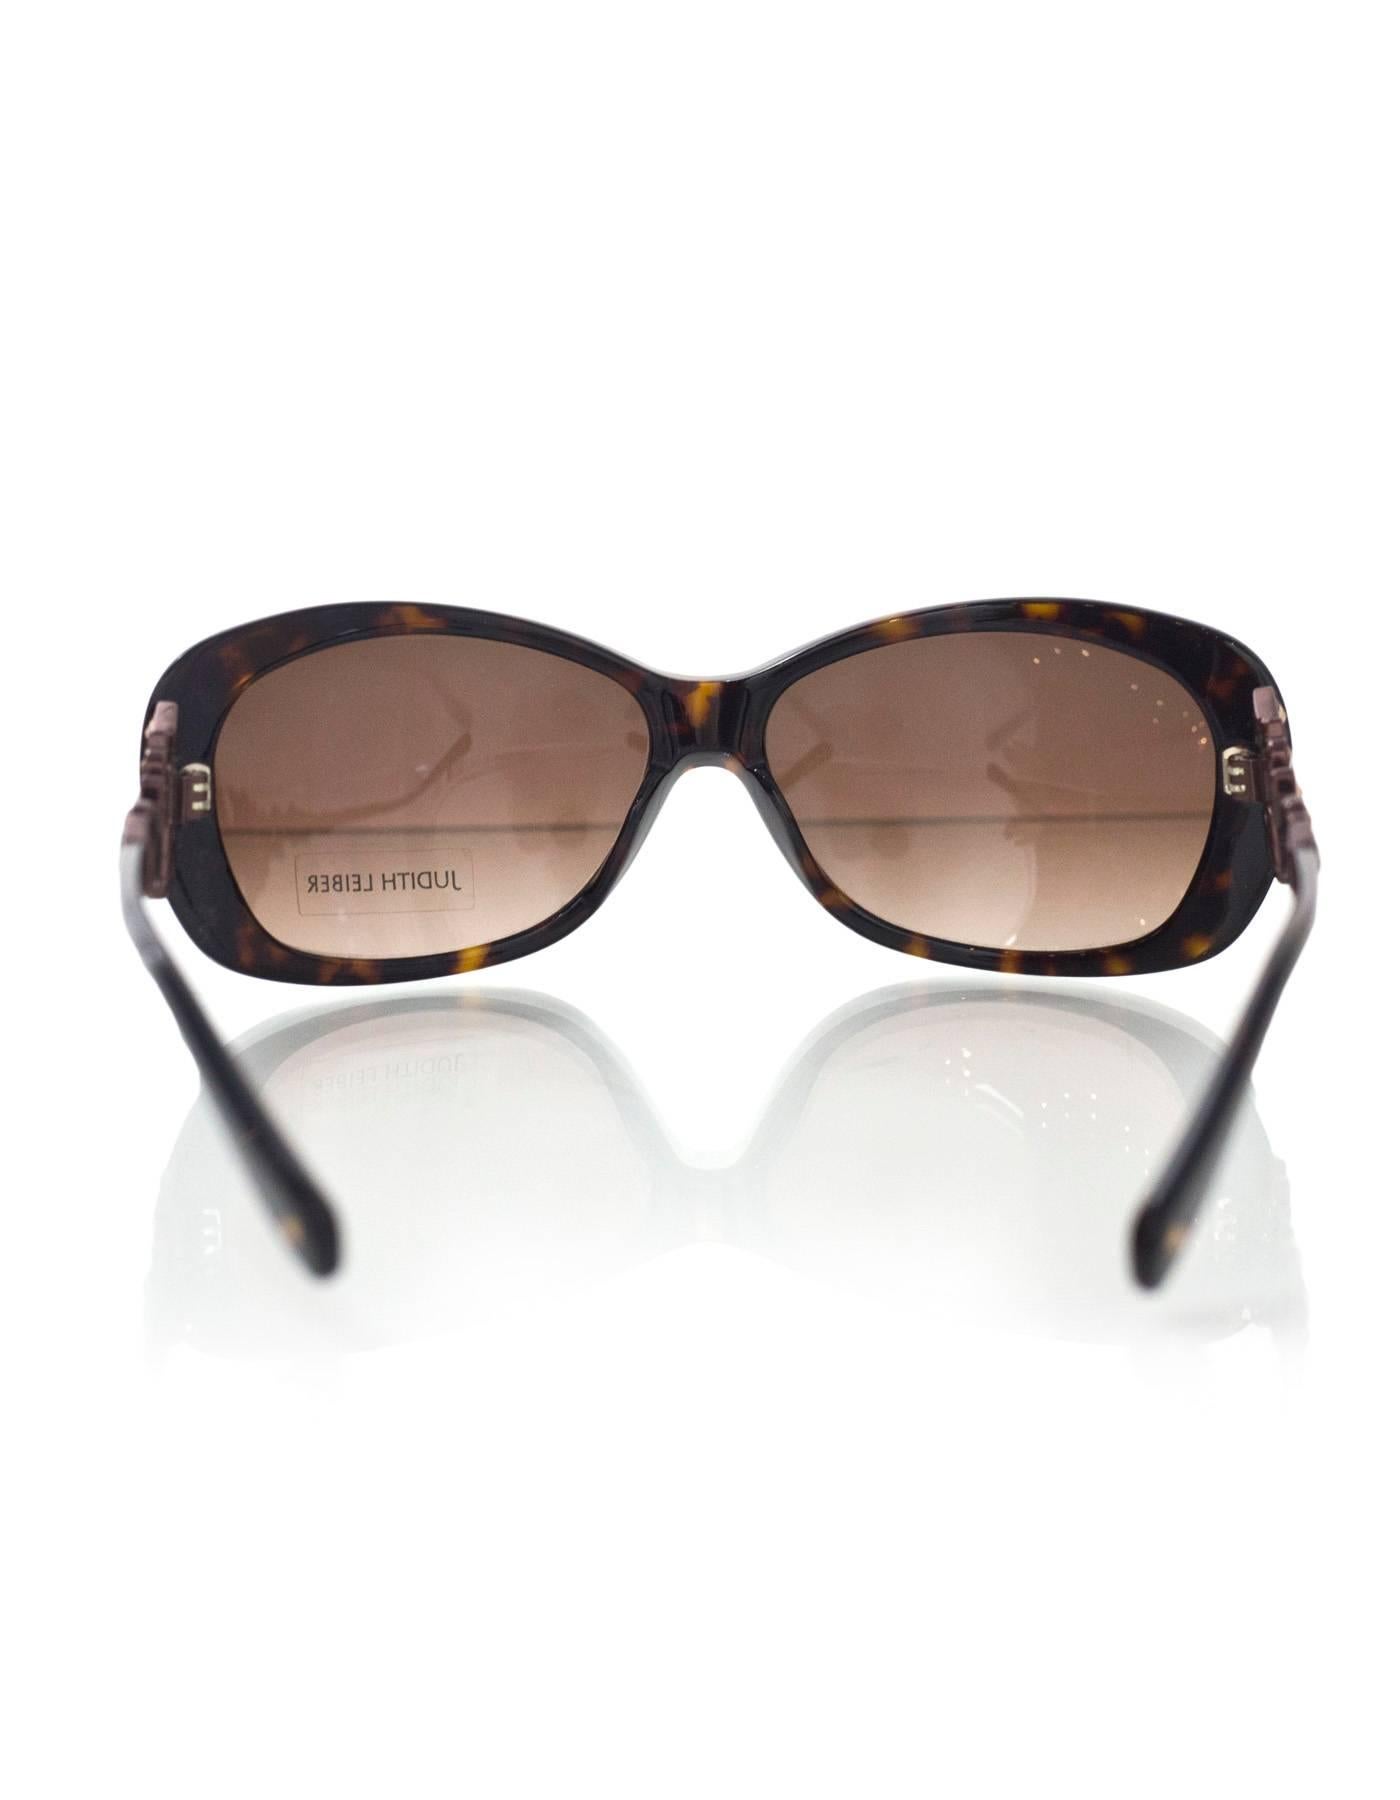 judith leiber glasses with crystals